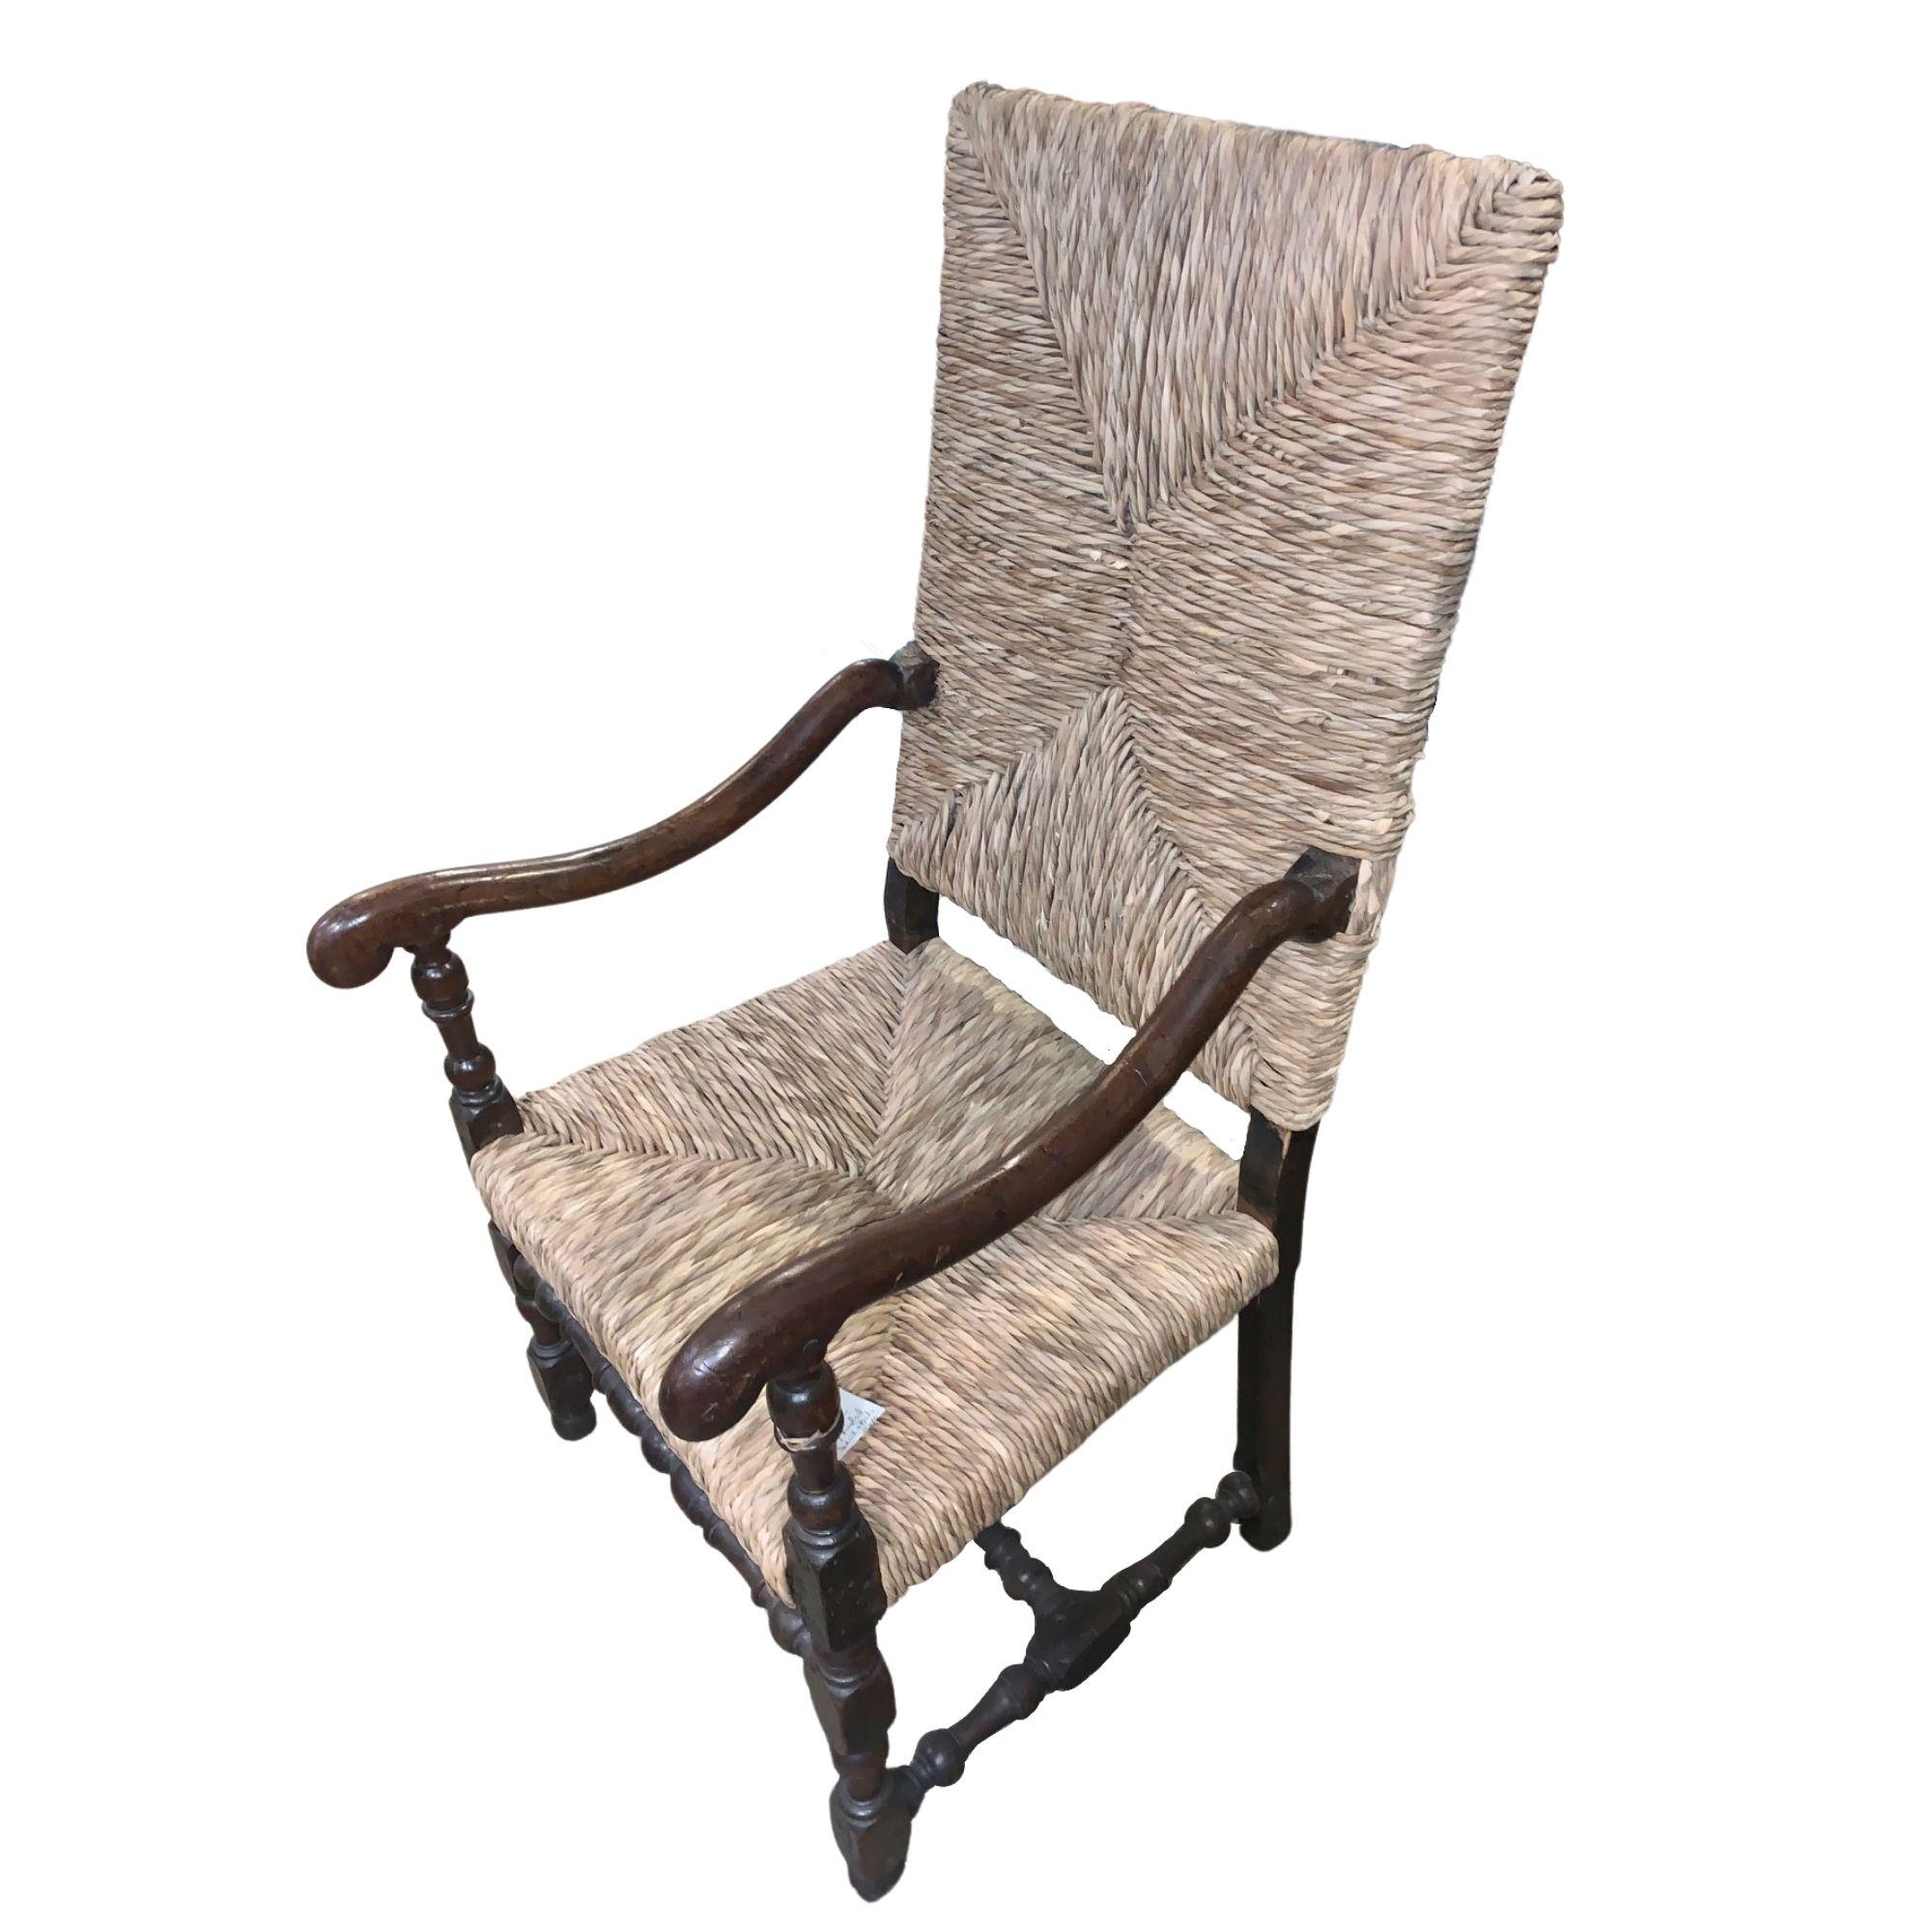 19th century Chair with Rushed Back 